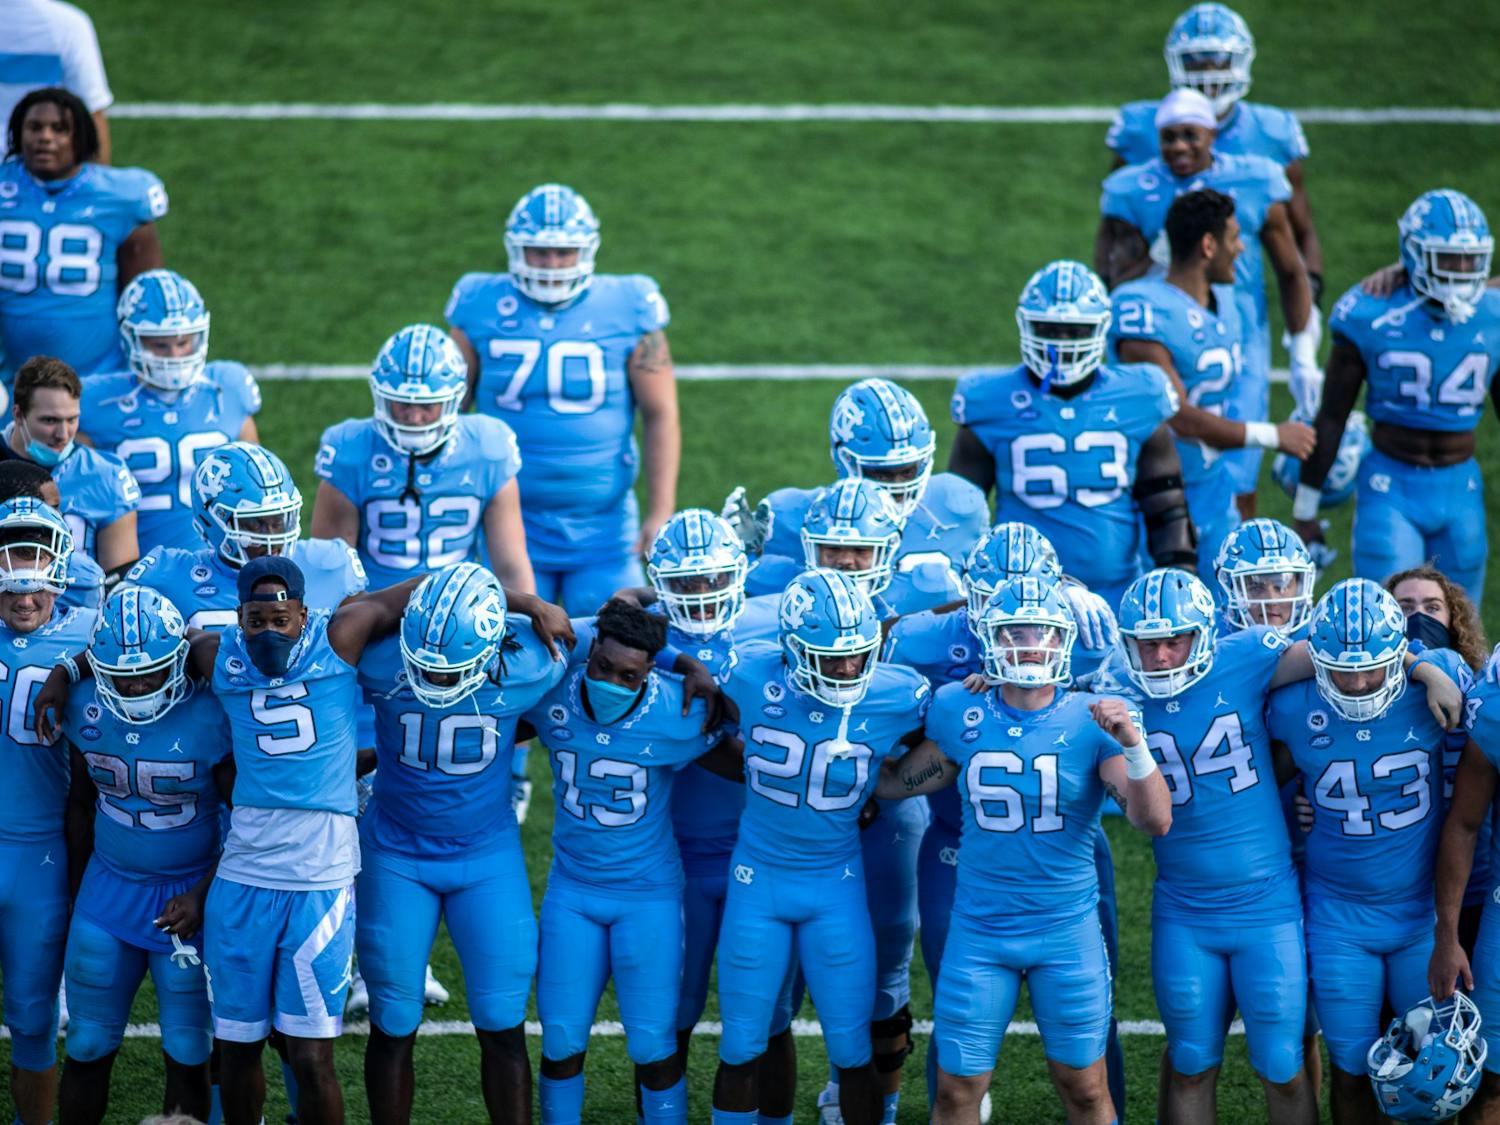 The UNC football team sings the alma mater in Kenan Stadium Oct. 24, 2020. The Tar Heels beat the Wolfpack 48-21.